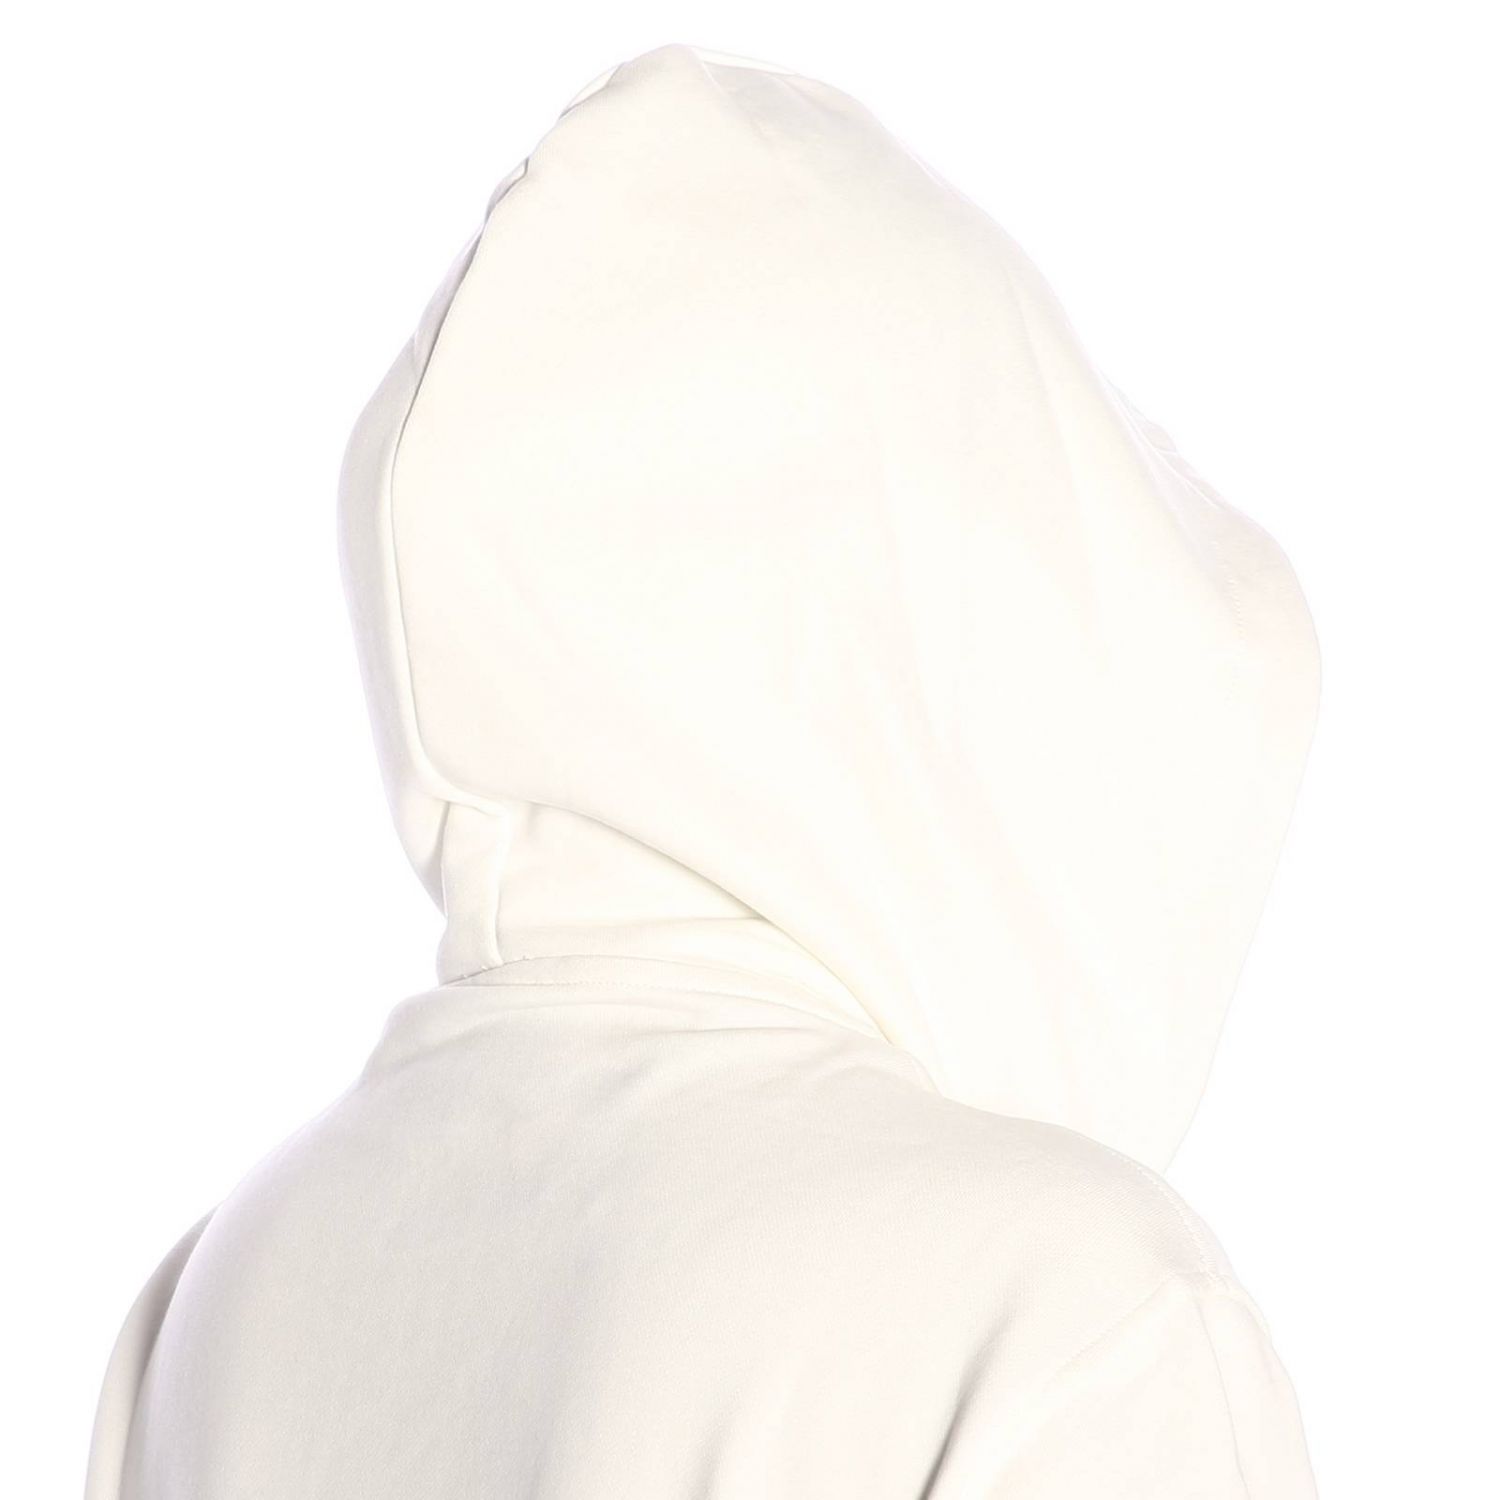 Moschino Outlet: Capsule Collection Pixel sweatshirt with hood - White ...